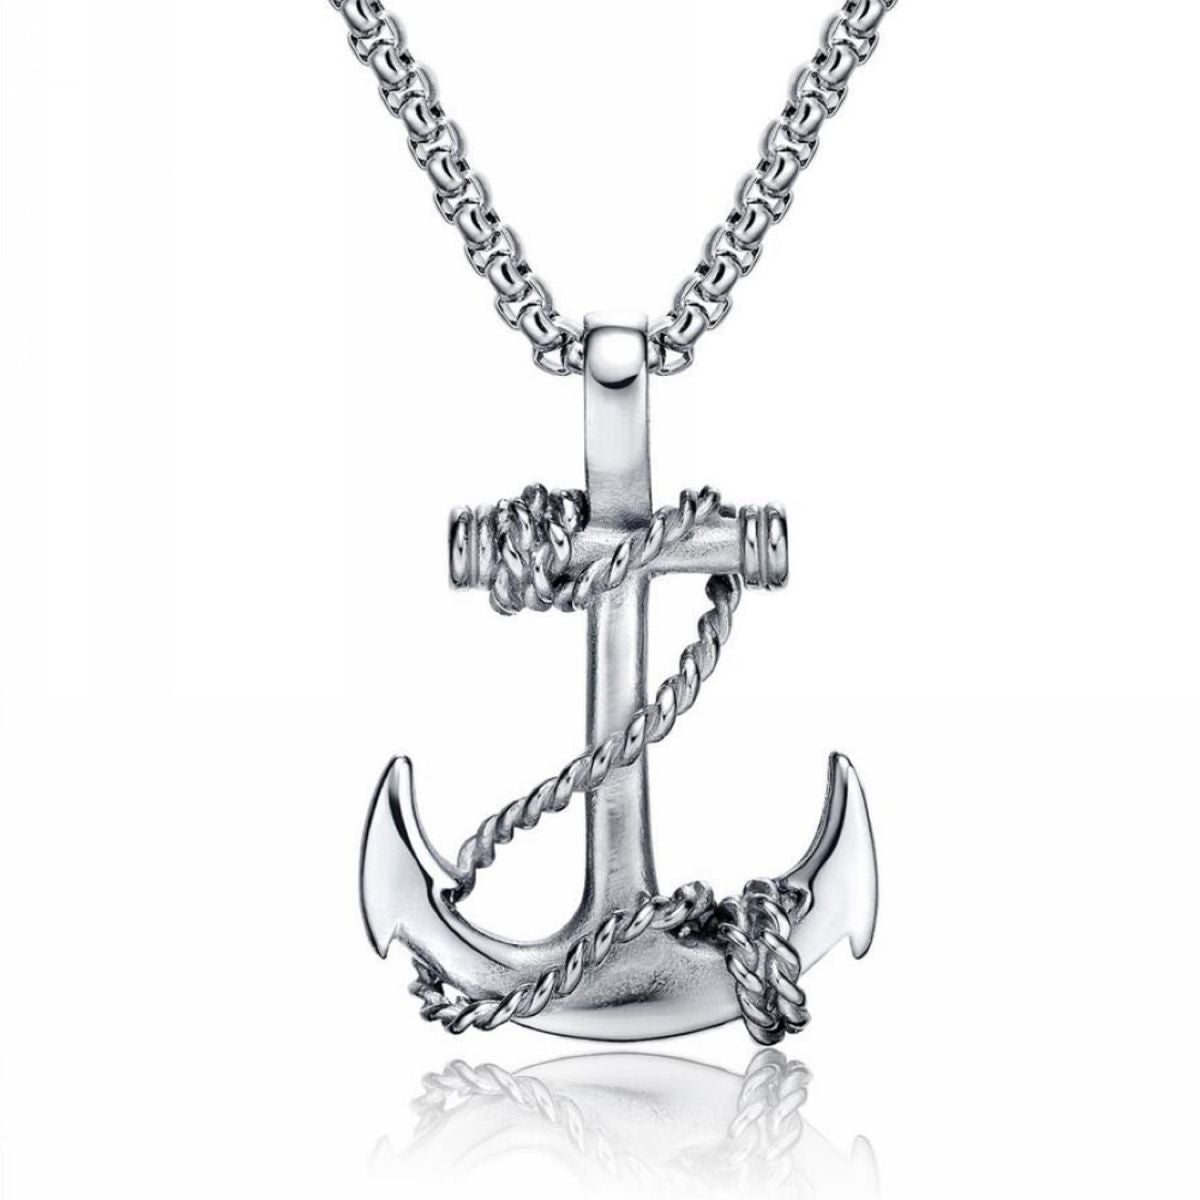 20, 50 or 100 Marine Anchor with Silver Metal Rope 17x12m (charm, Pendant)